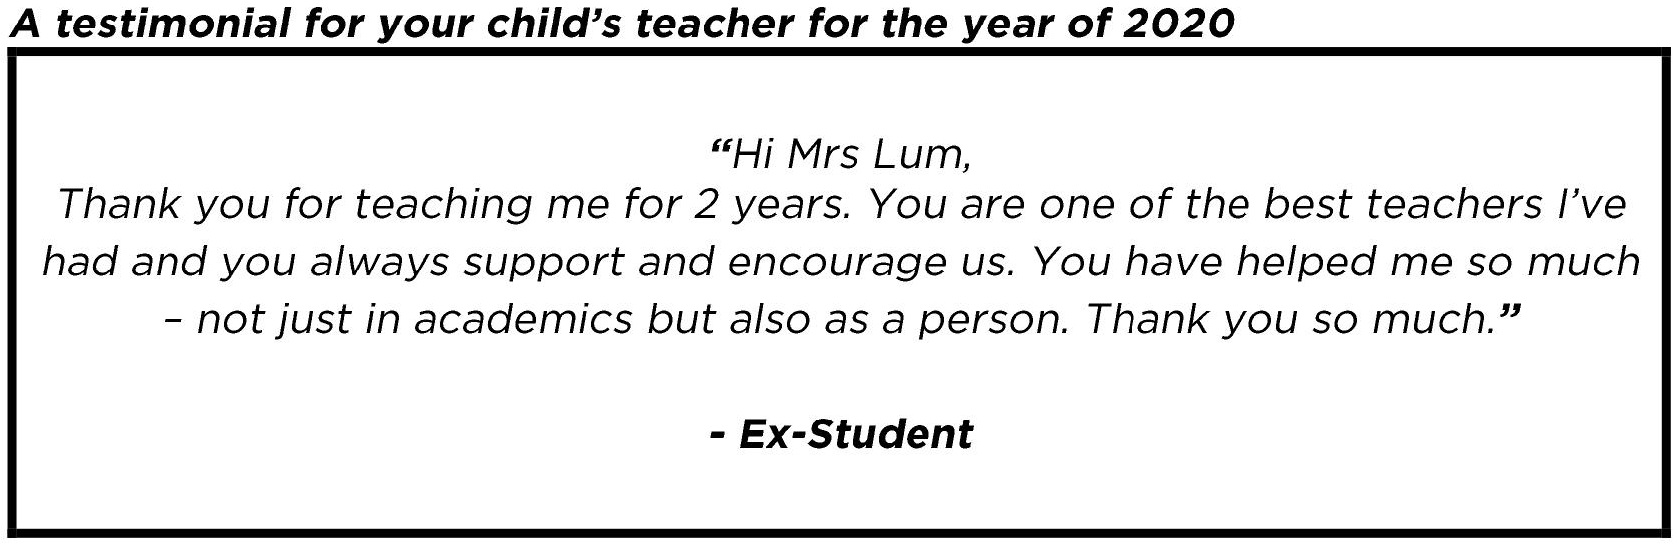 "...one of the best teachers I’ve had…"